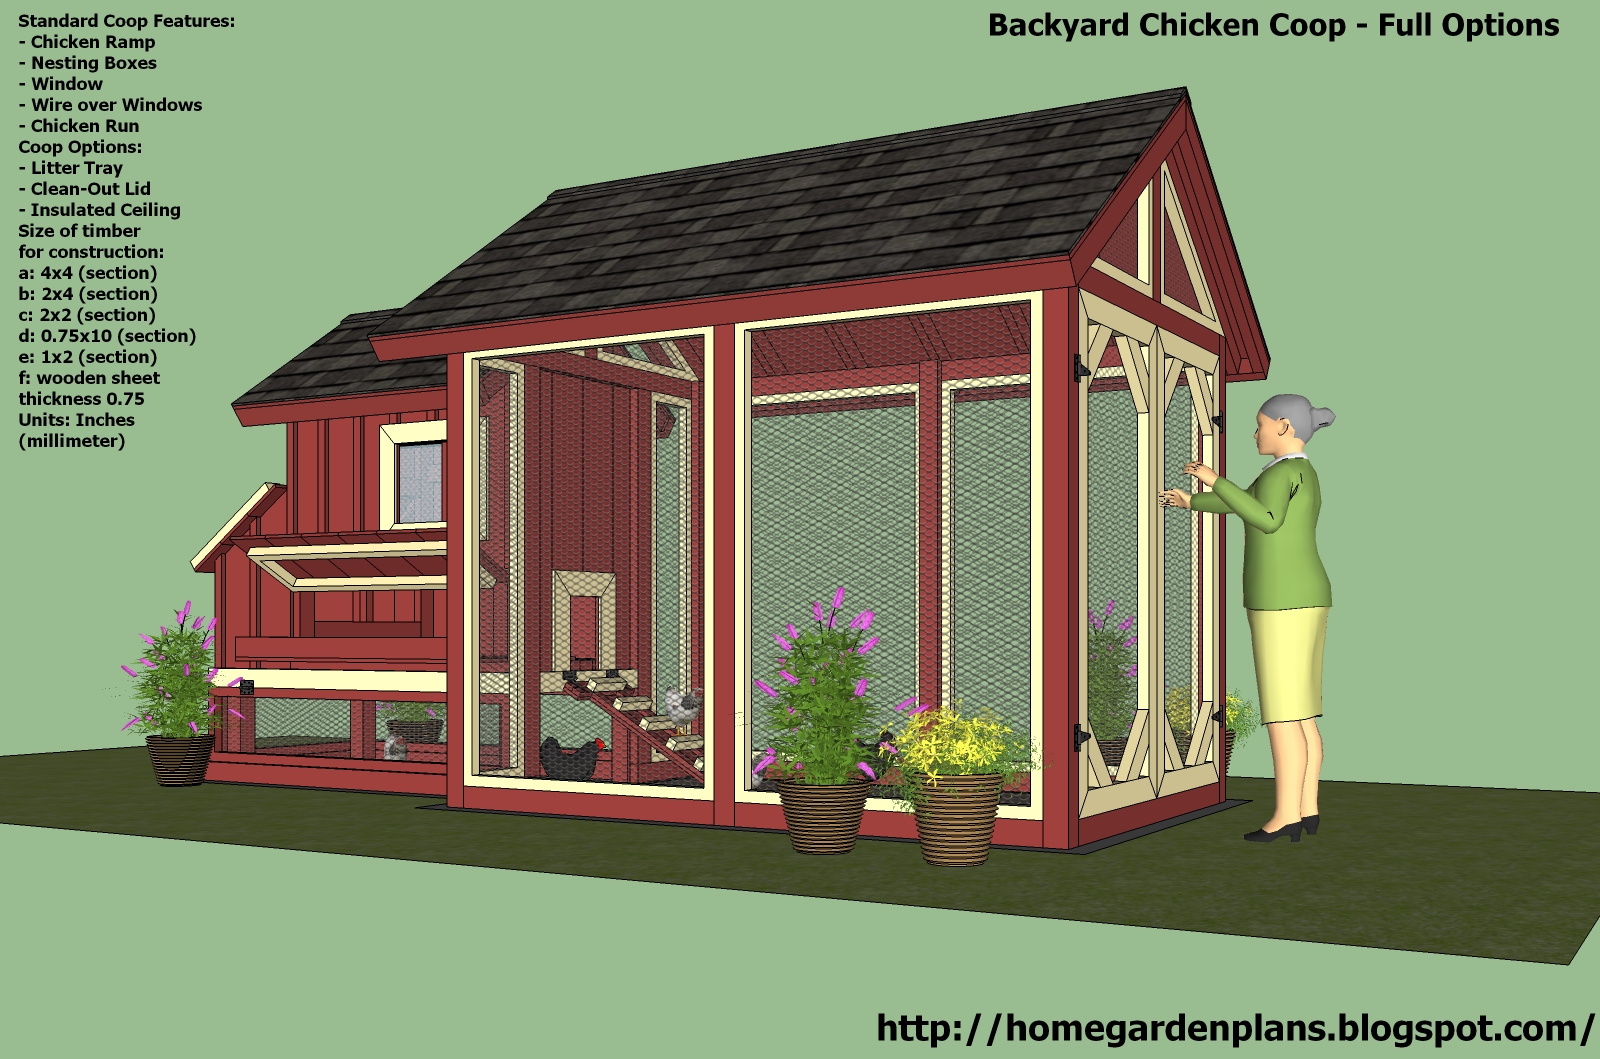 Free Printable Chicken Coop Plans | www.imgkid.com - The ...